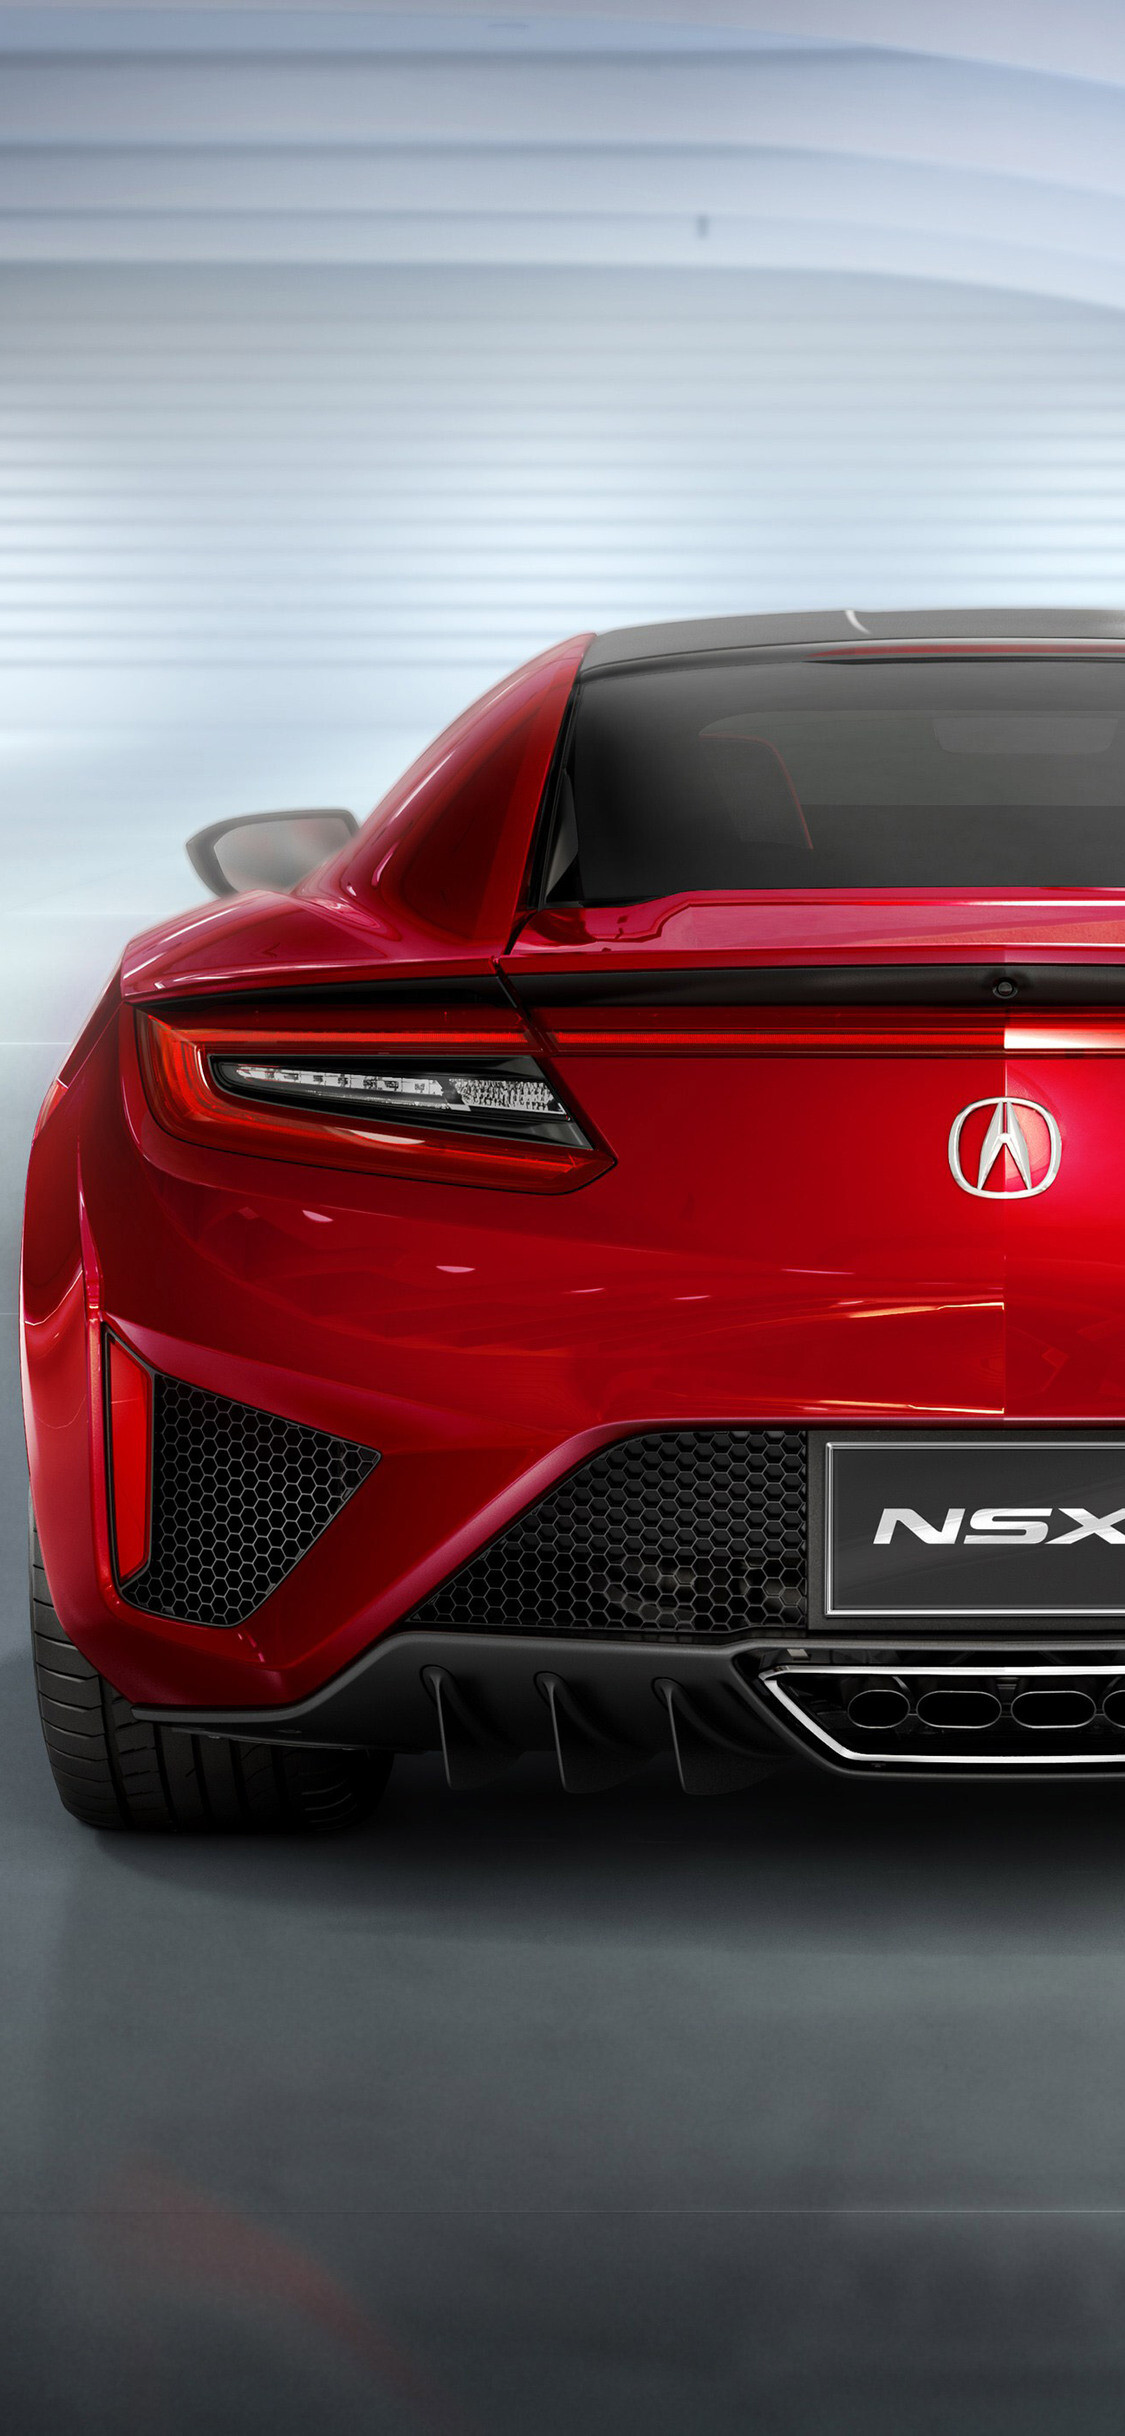 Acura: 2017 NSX, A two-seat, mid-engined coupe sports car manufactured by Honda. 1130x2440 HD Background.